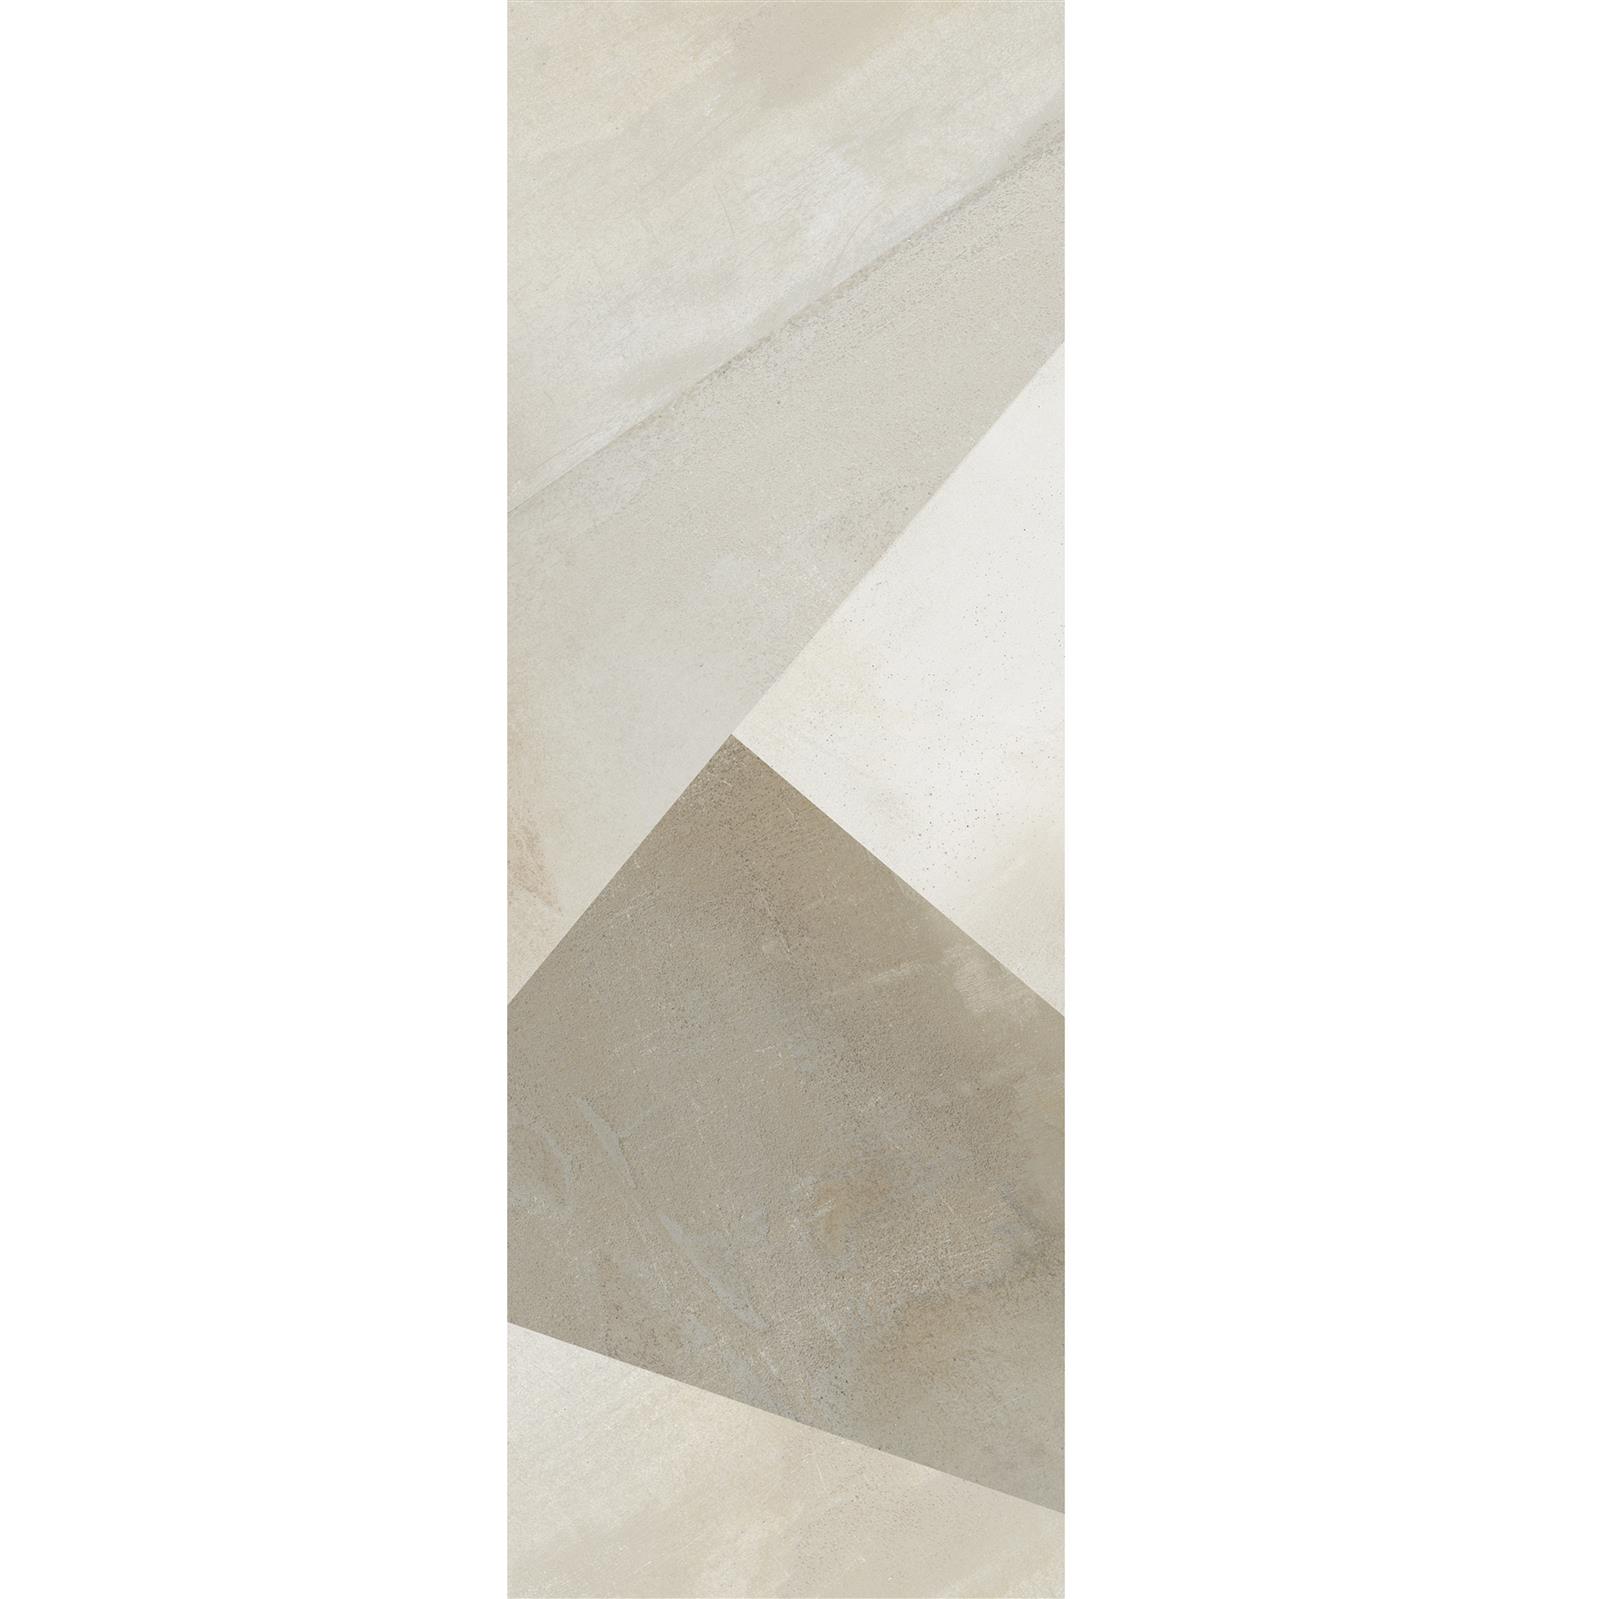 Wall Tiles Queens Rectified Sand Decor 2 30x90cm